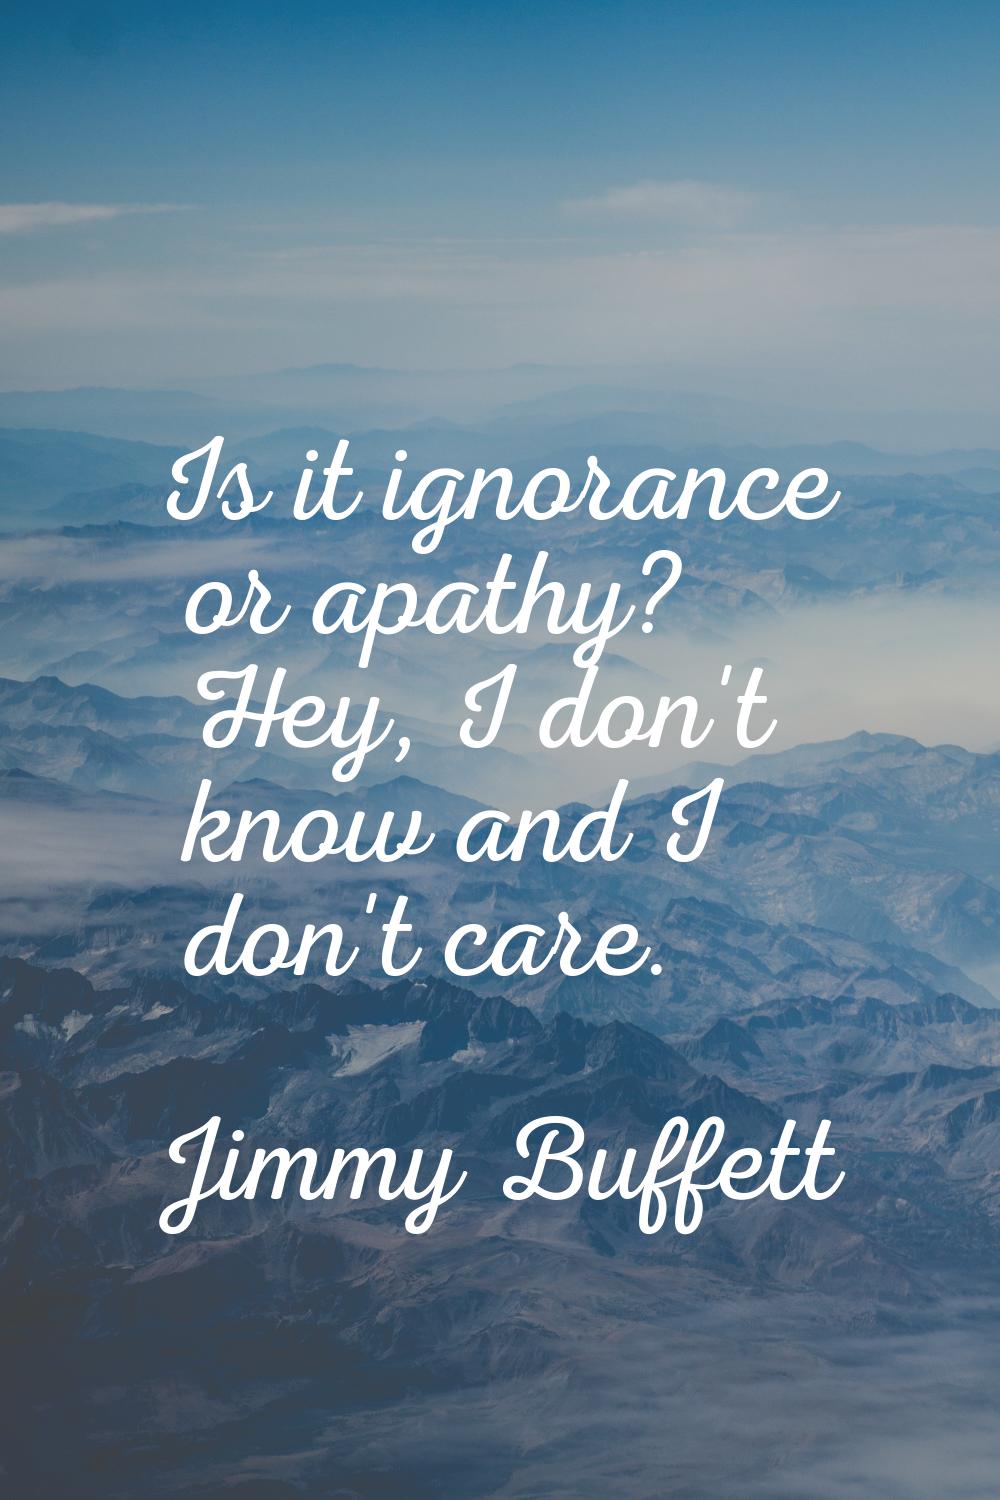 Is it ignorance or apathy? Hey, I don't know and I don't care.